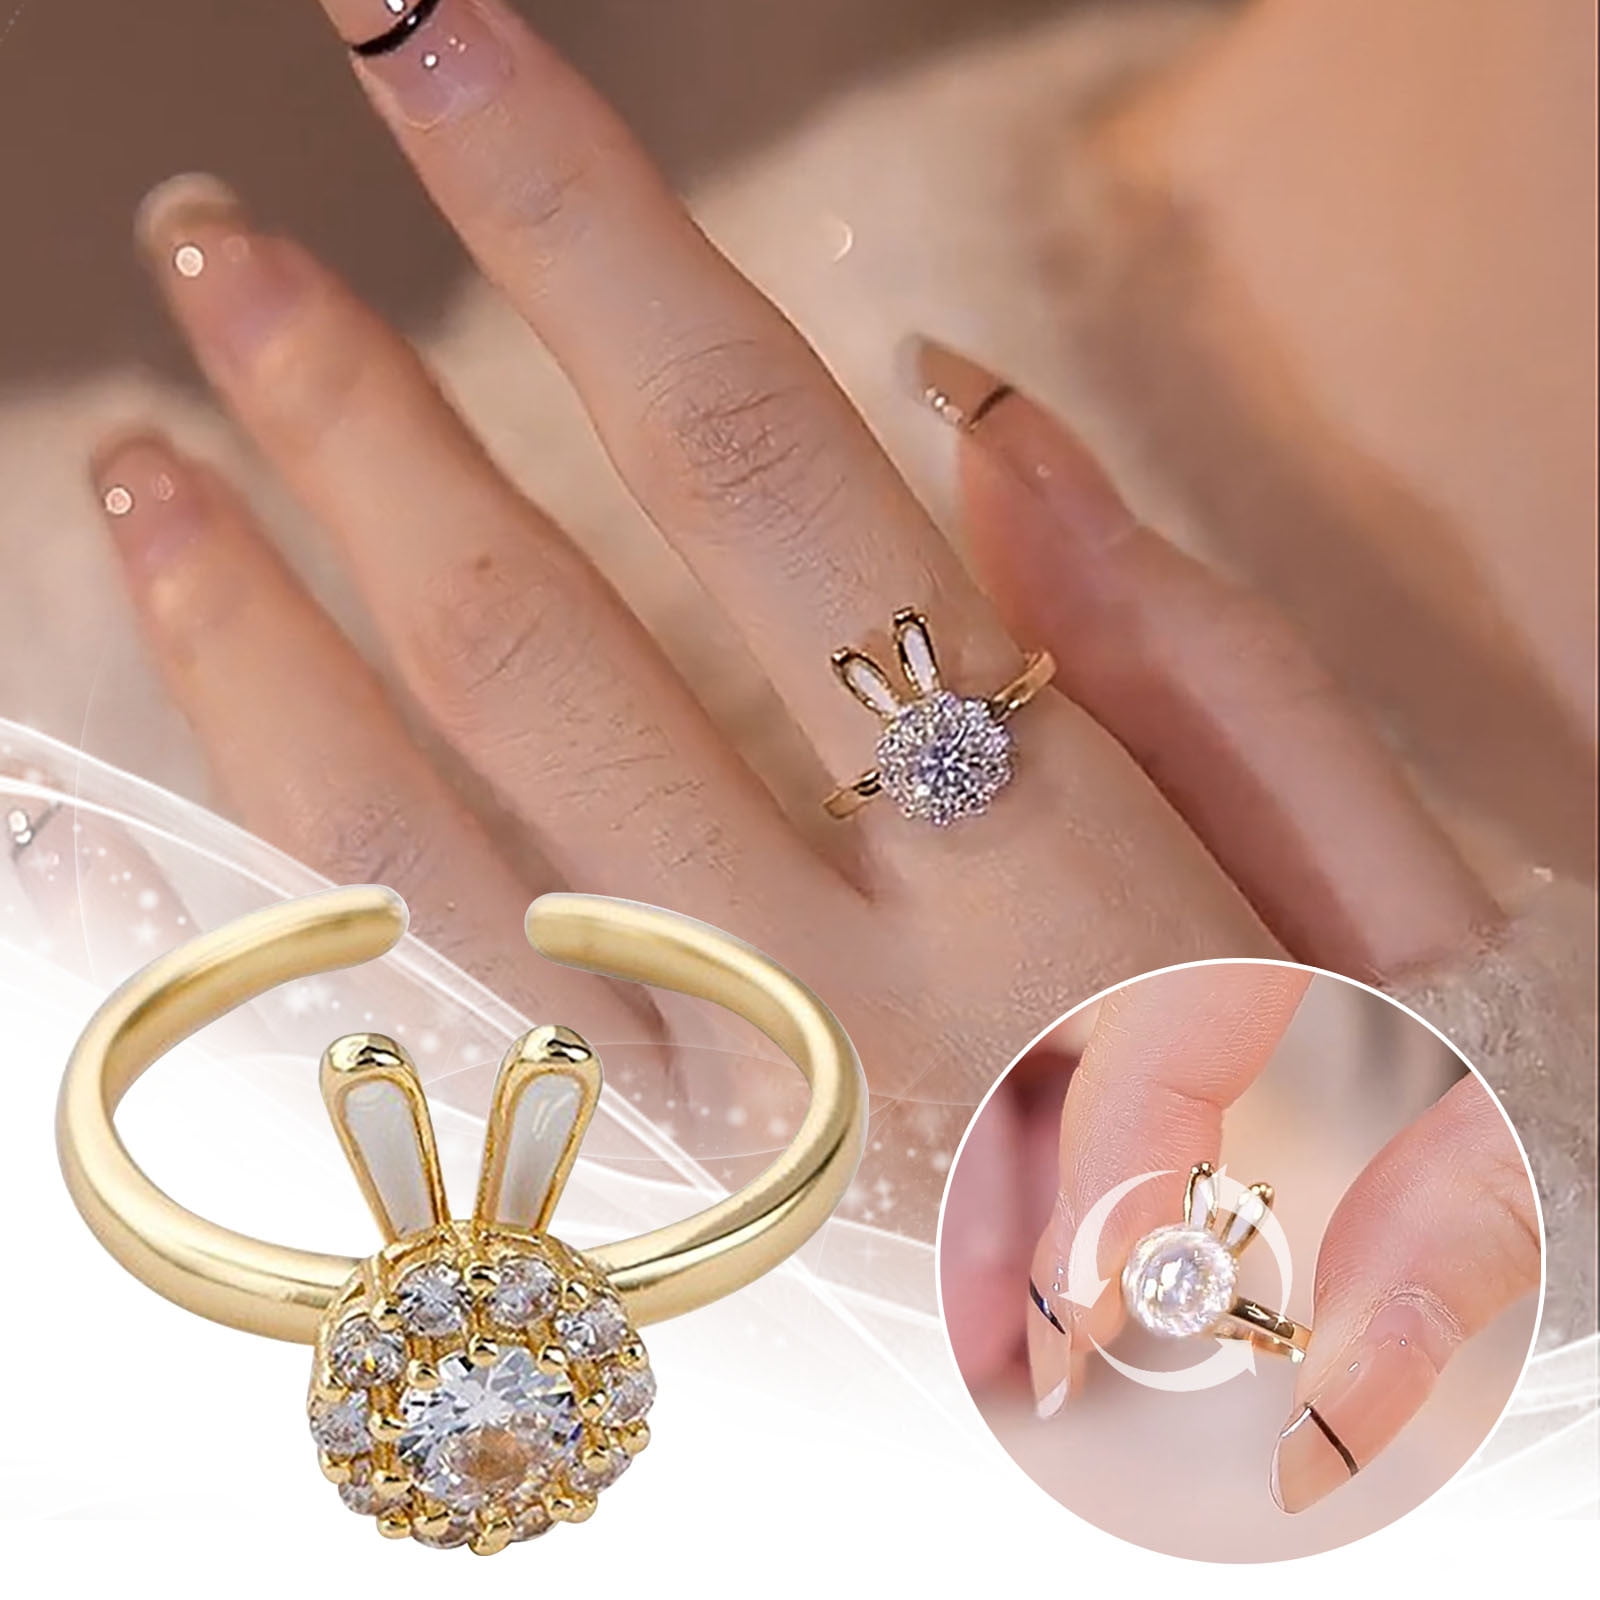 Gold Ring Designs 2020 | New Finger Ring Designs For Women | Latest -  YouTube | Gold ring designs, Gold finger rings, Gold necklace designs